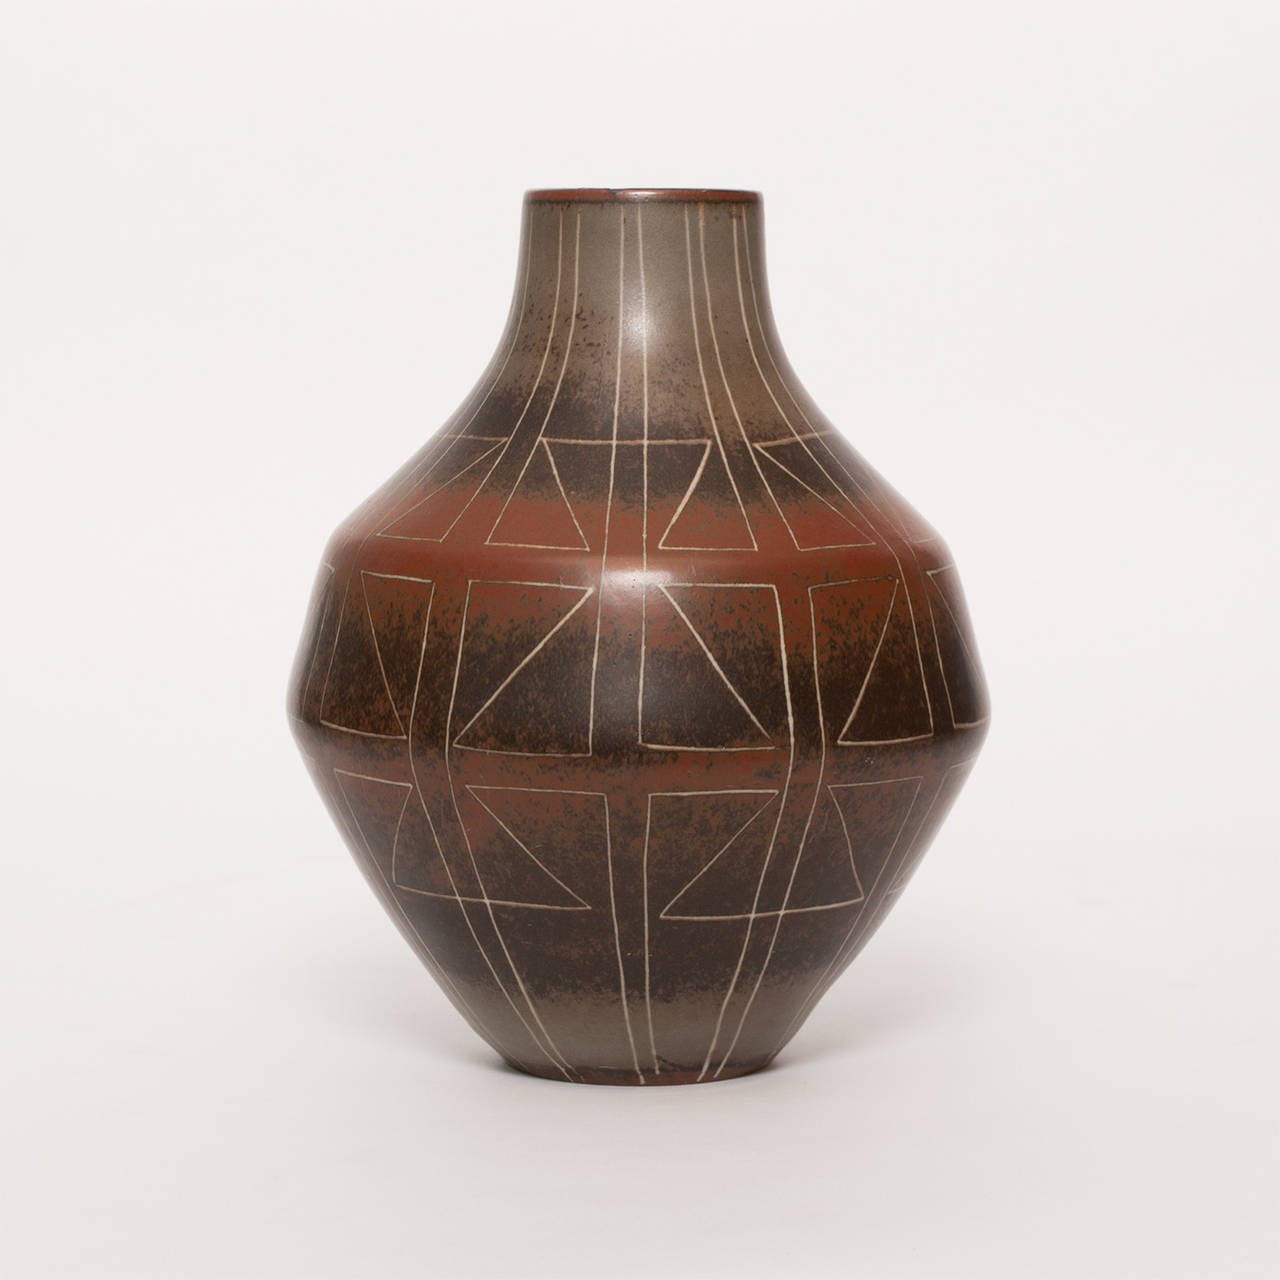 Large Swedish mid-century unique artist studio vase by Einar Lynge-Ahlberg for Rorstrand 1954-57. The vase features a combination of organic and geometric forms and enhanced with subtle glazing. Heights: 13